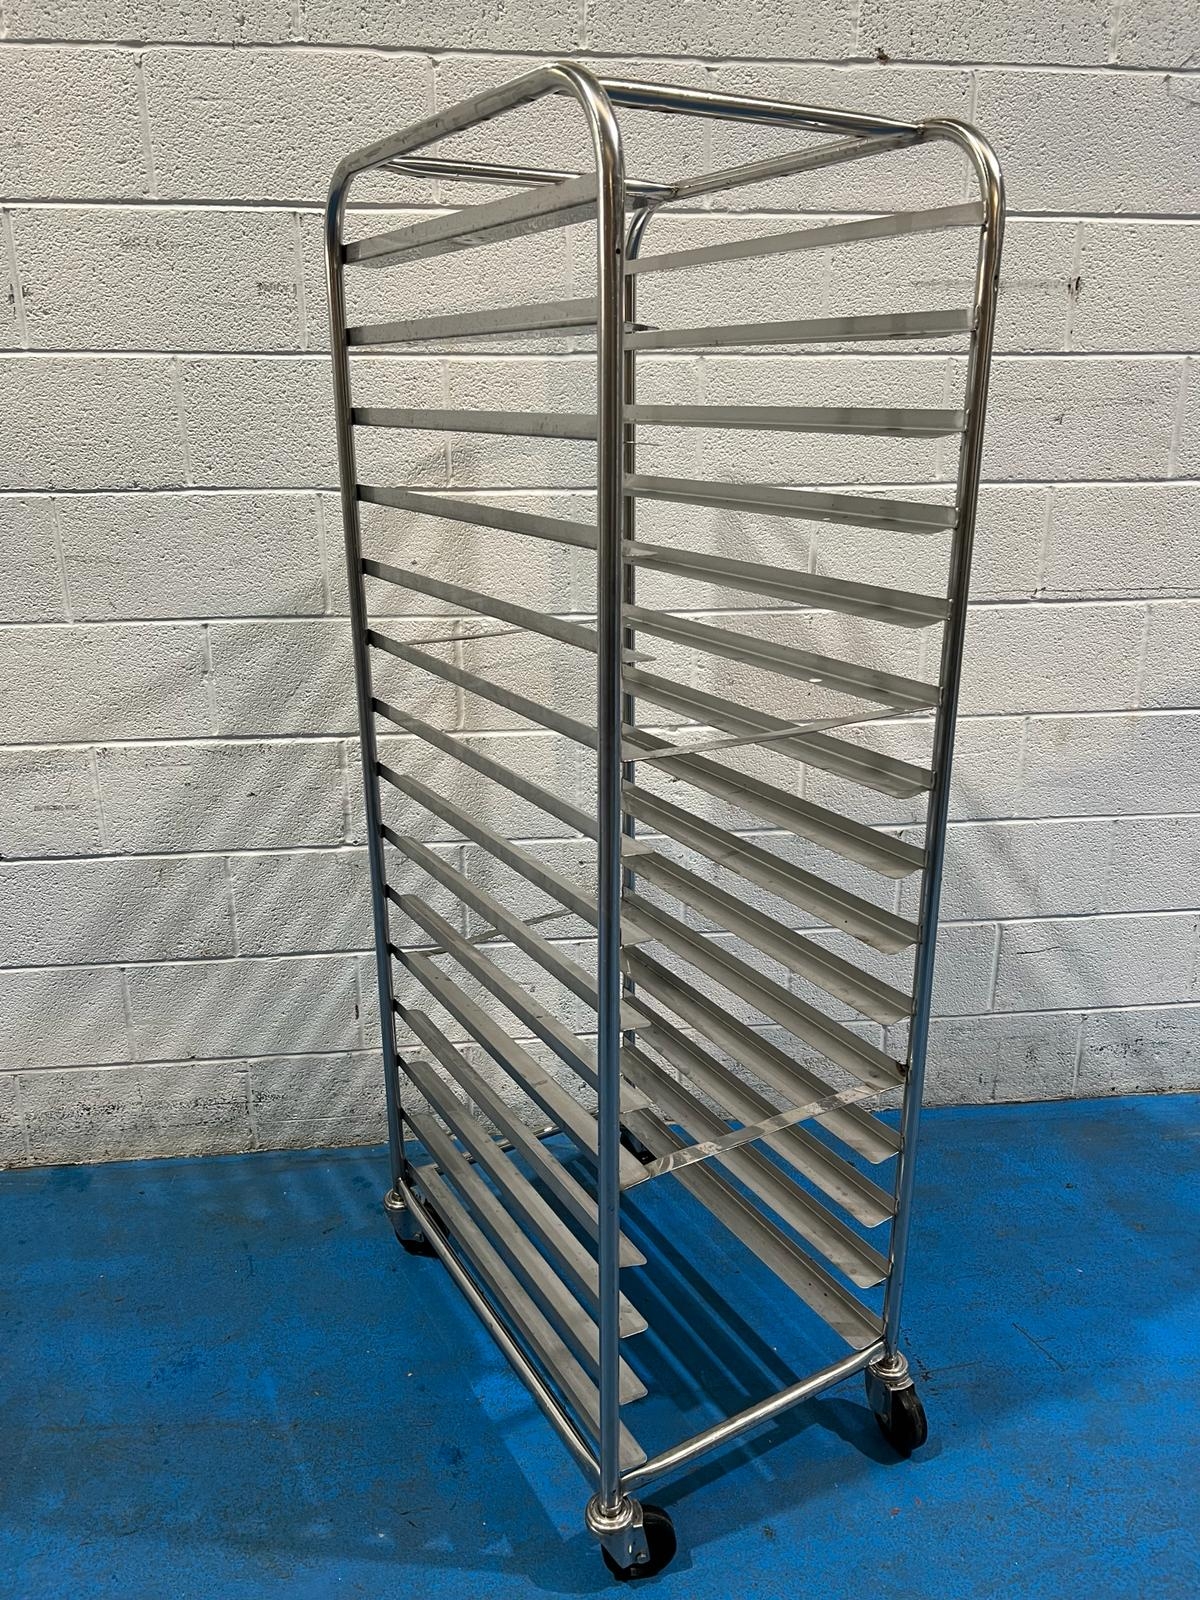 Large Selection of Racks - Variety of Runner to take 18" x 30" Trays